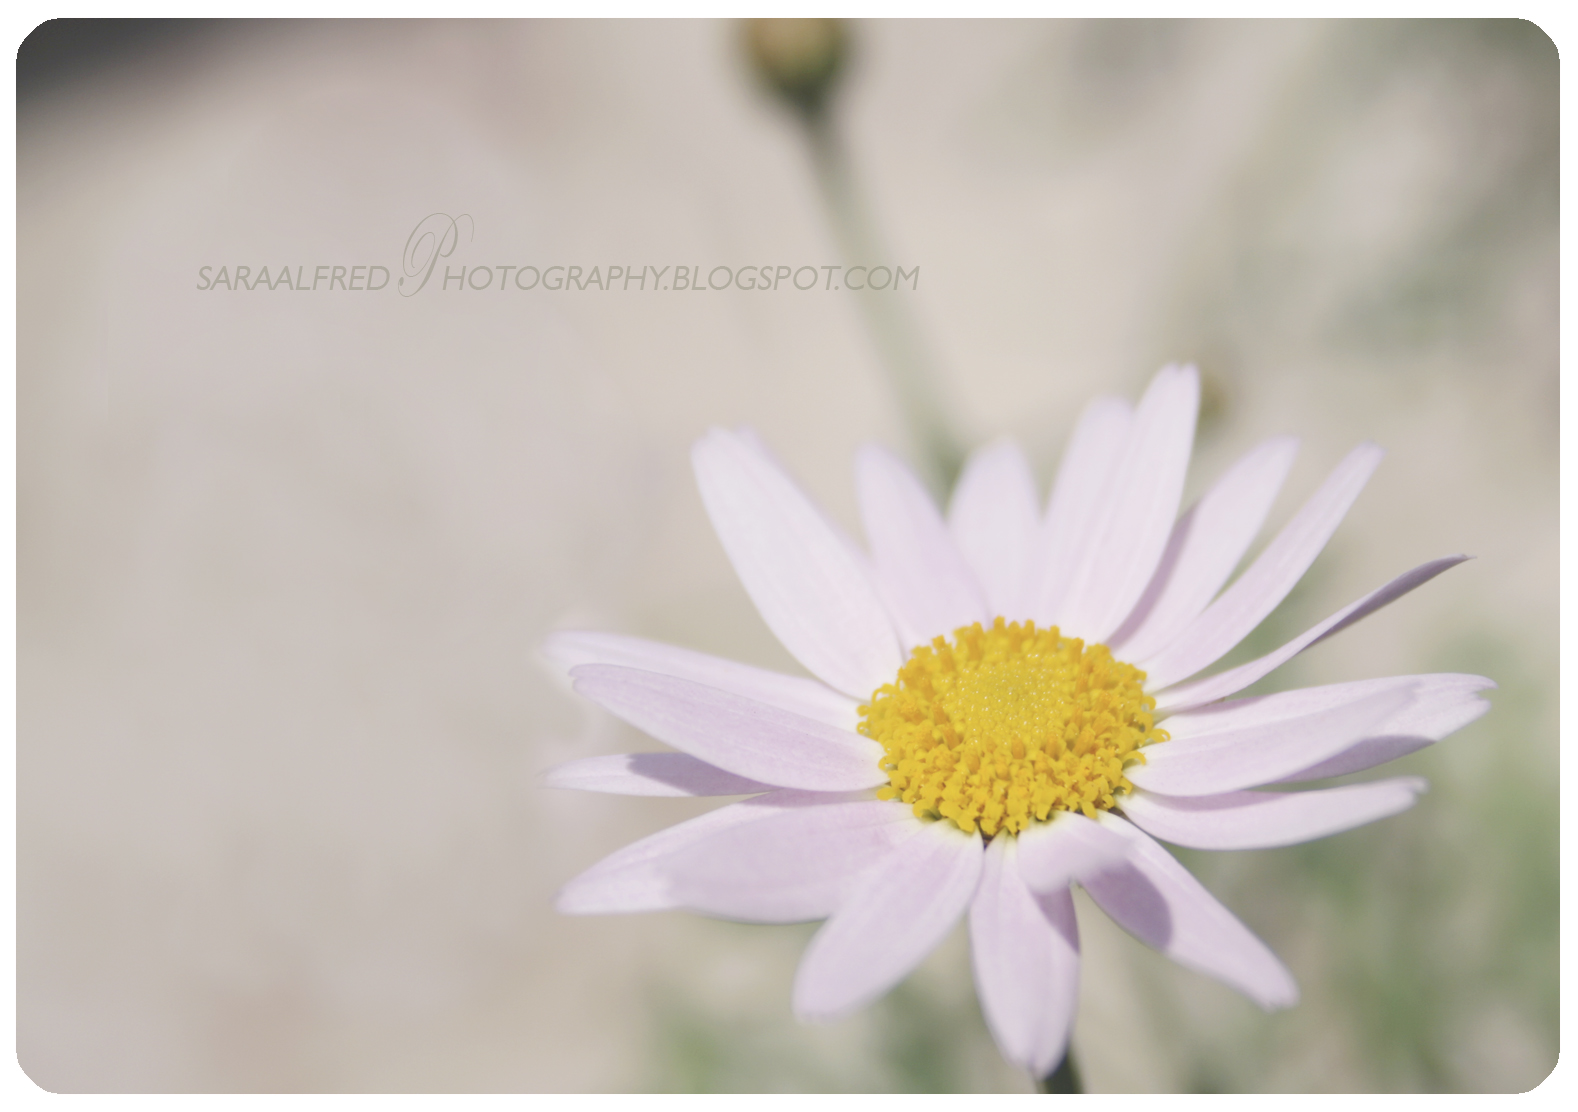 small, purple flower with yellow center stands out against a soft white backdrop